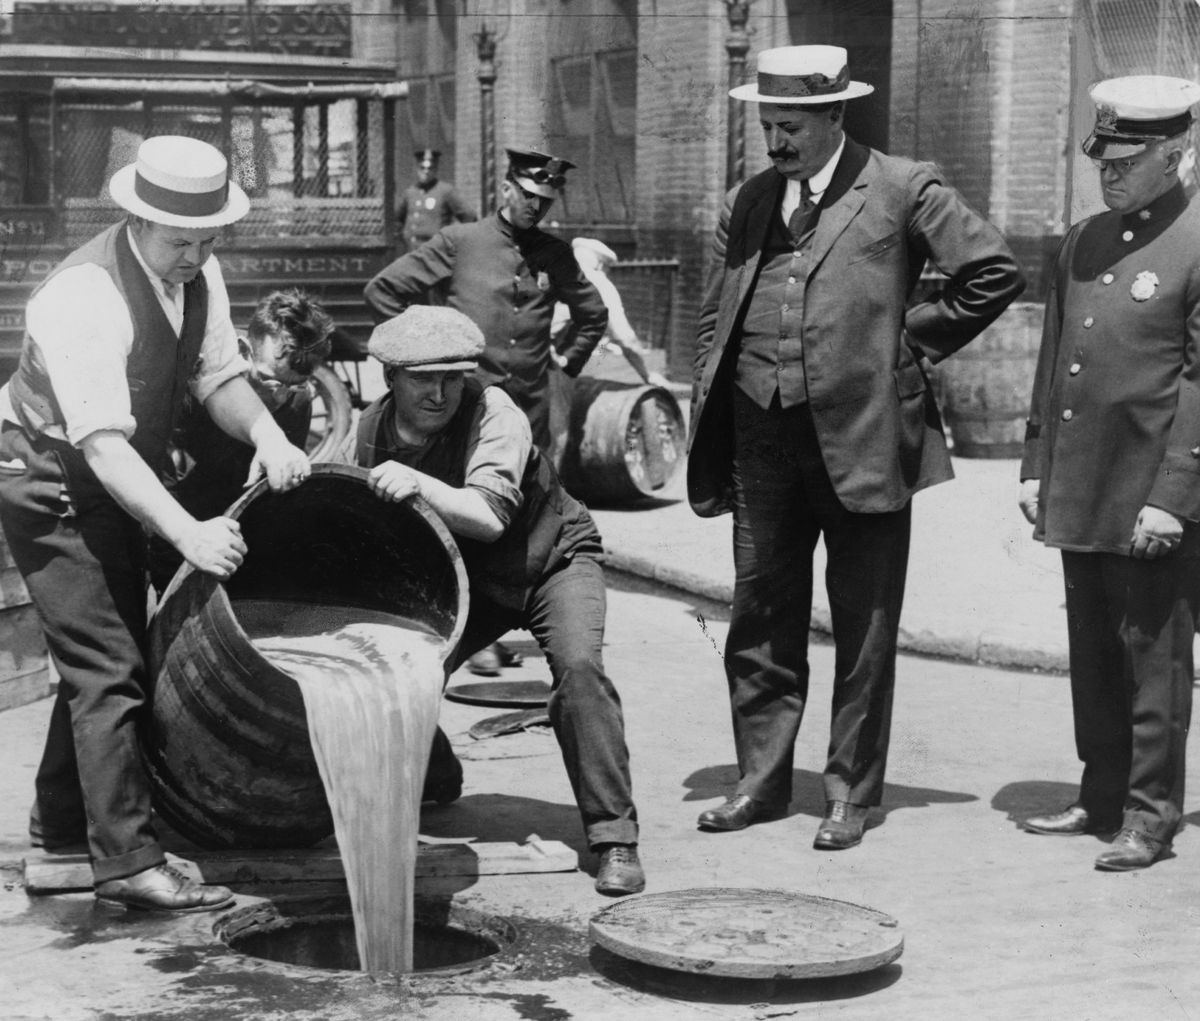 Police oversee the confiscation and destruction of liquor during Prohibition.